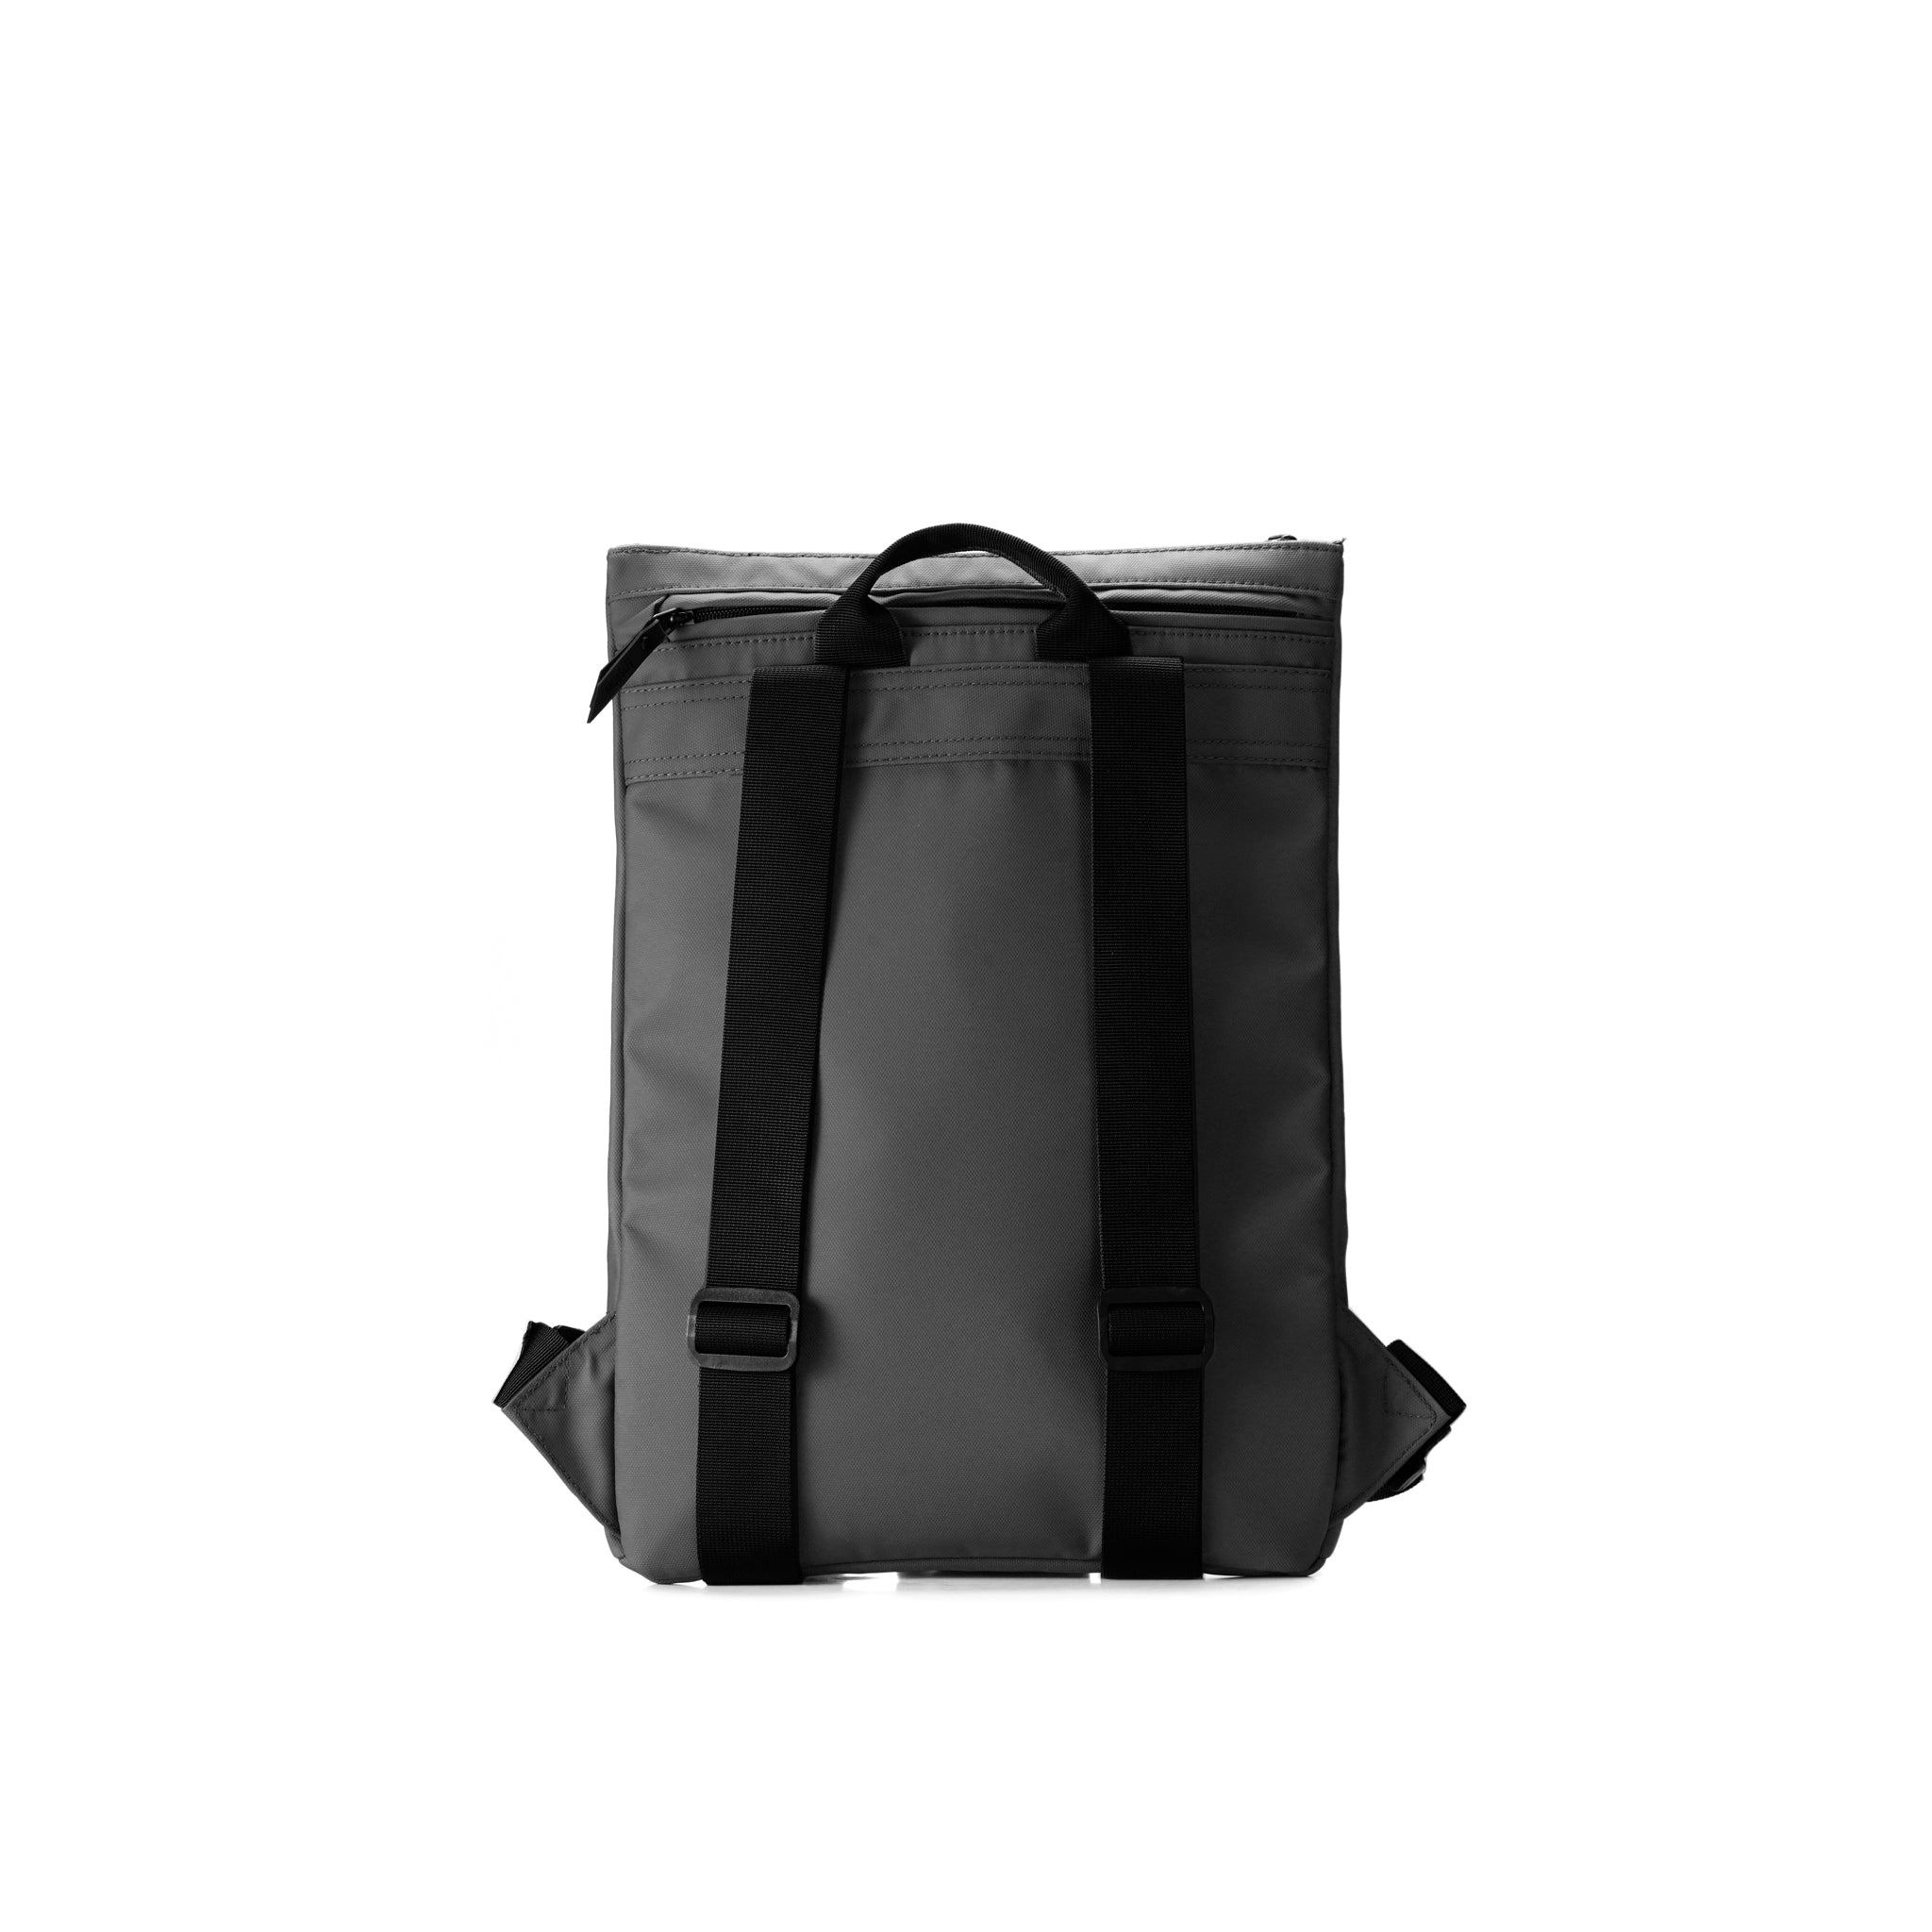 Mueslii light backpack,  made of PU coated waterproof nylon, with a laptop compartment, color grey, back view.